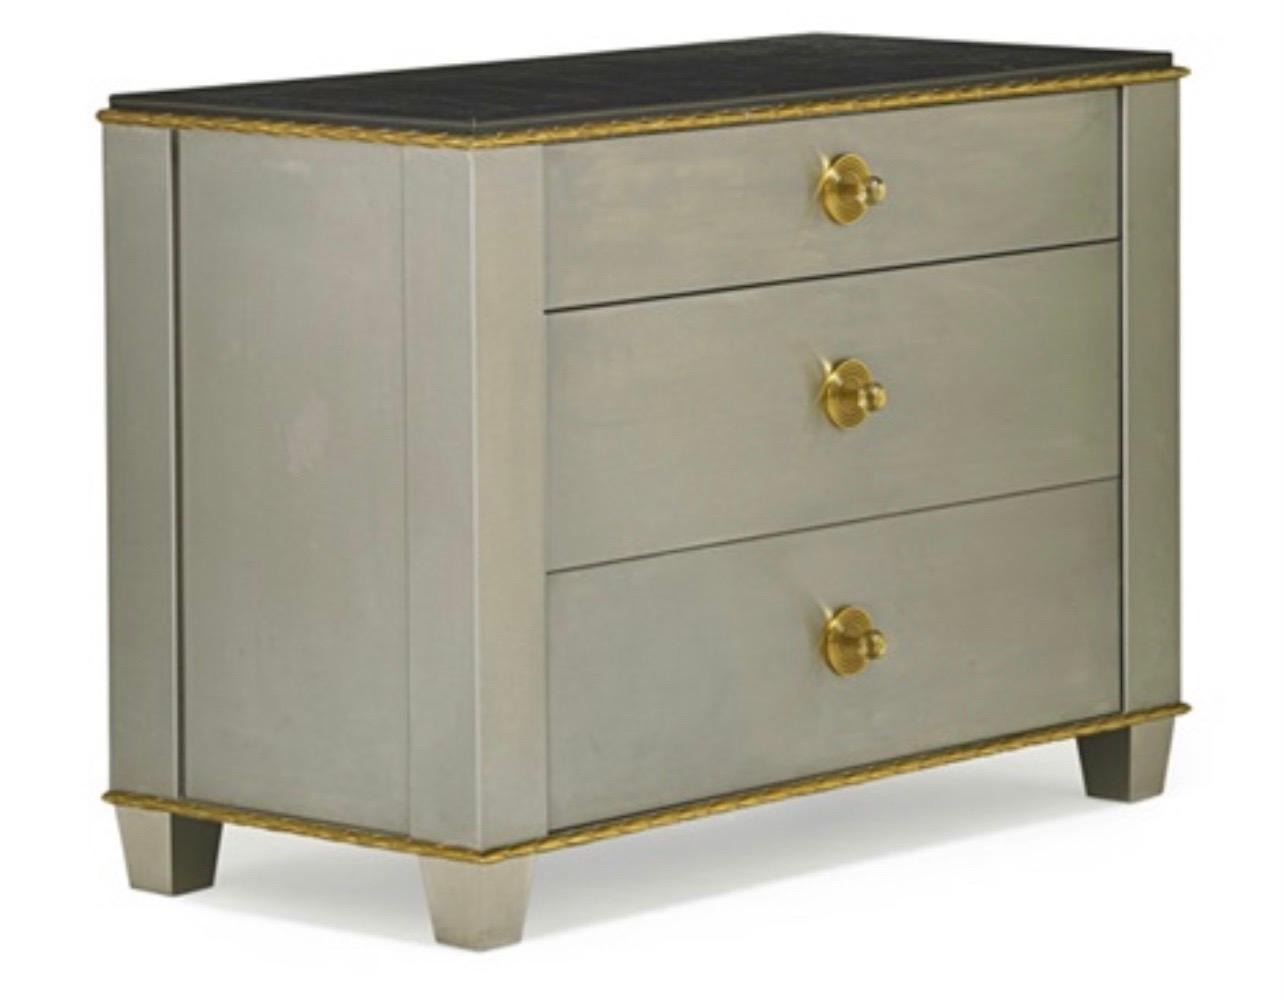 Wonderful Lorin Marsh Jansen Stainless Steel Leather Top Bronze Chest Cabinet In Good Condition For Sale In Roslyn, NY